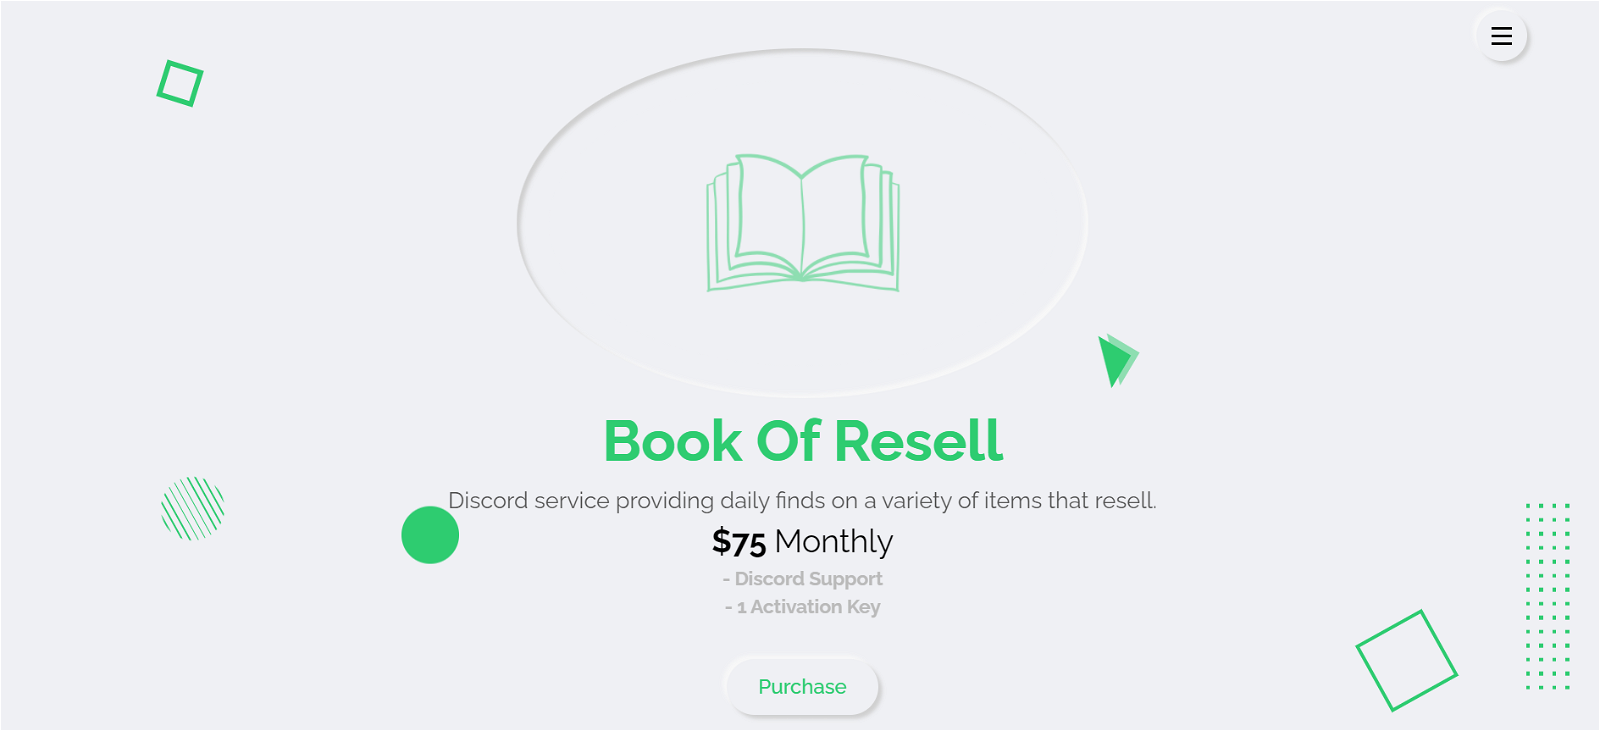 Book Of Resell cook group presentation banner